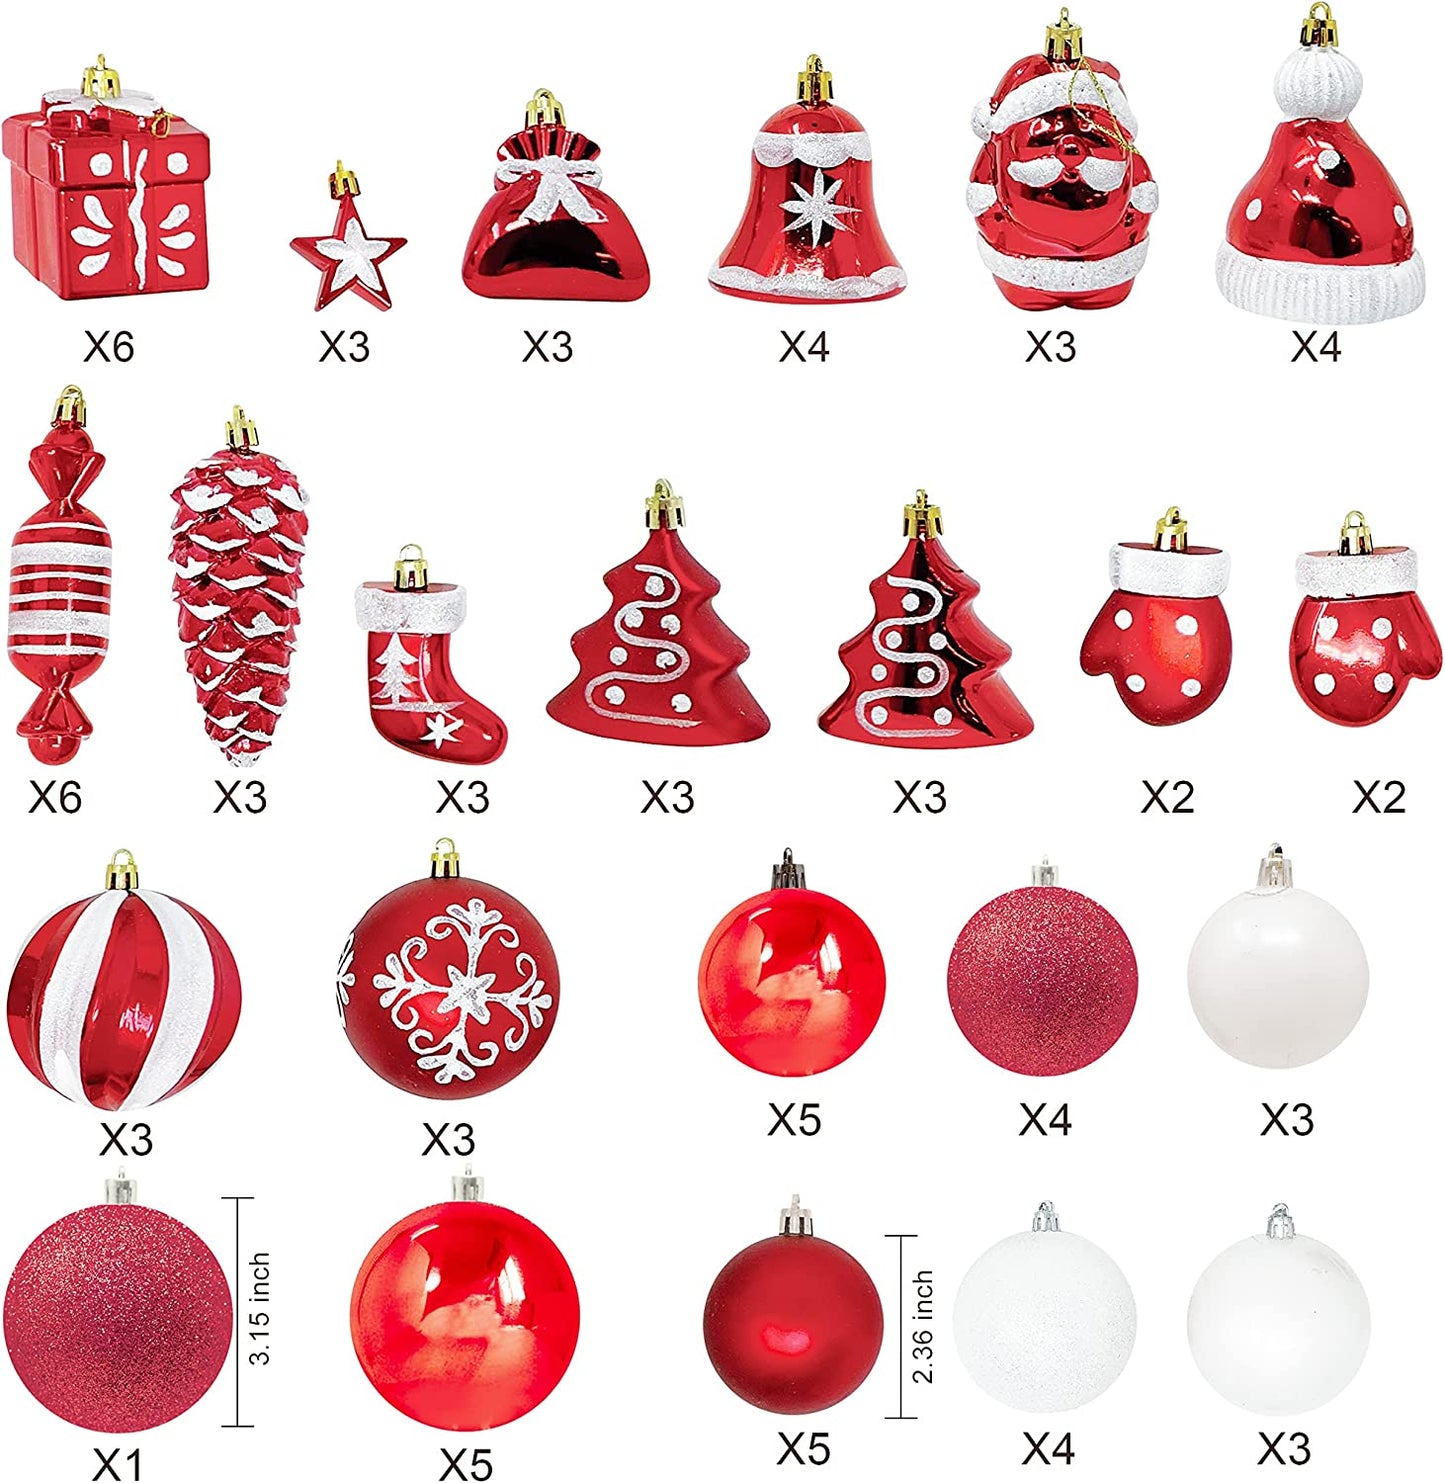 81 Pcs Assorted Shape Christmas Ornaments (Red&White)